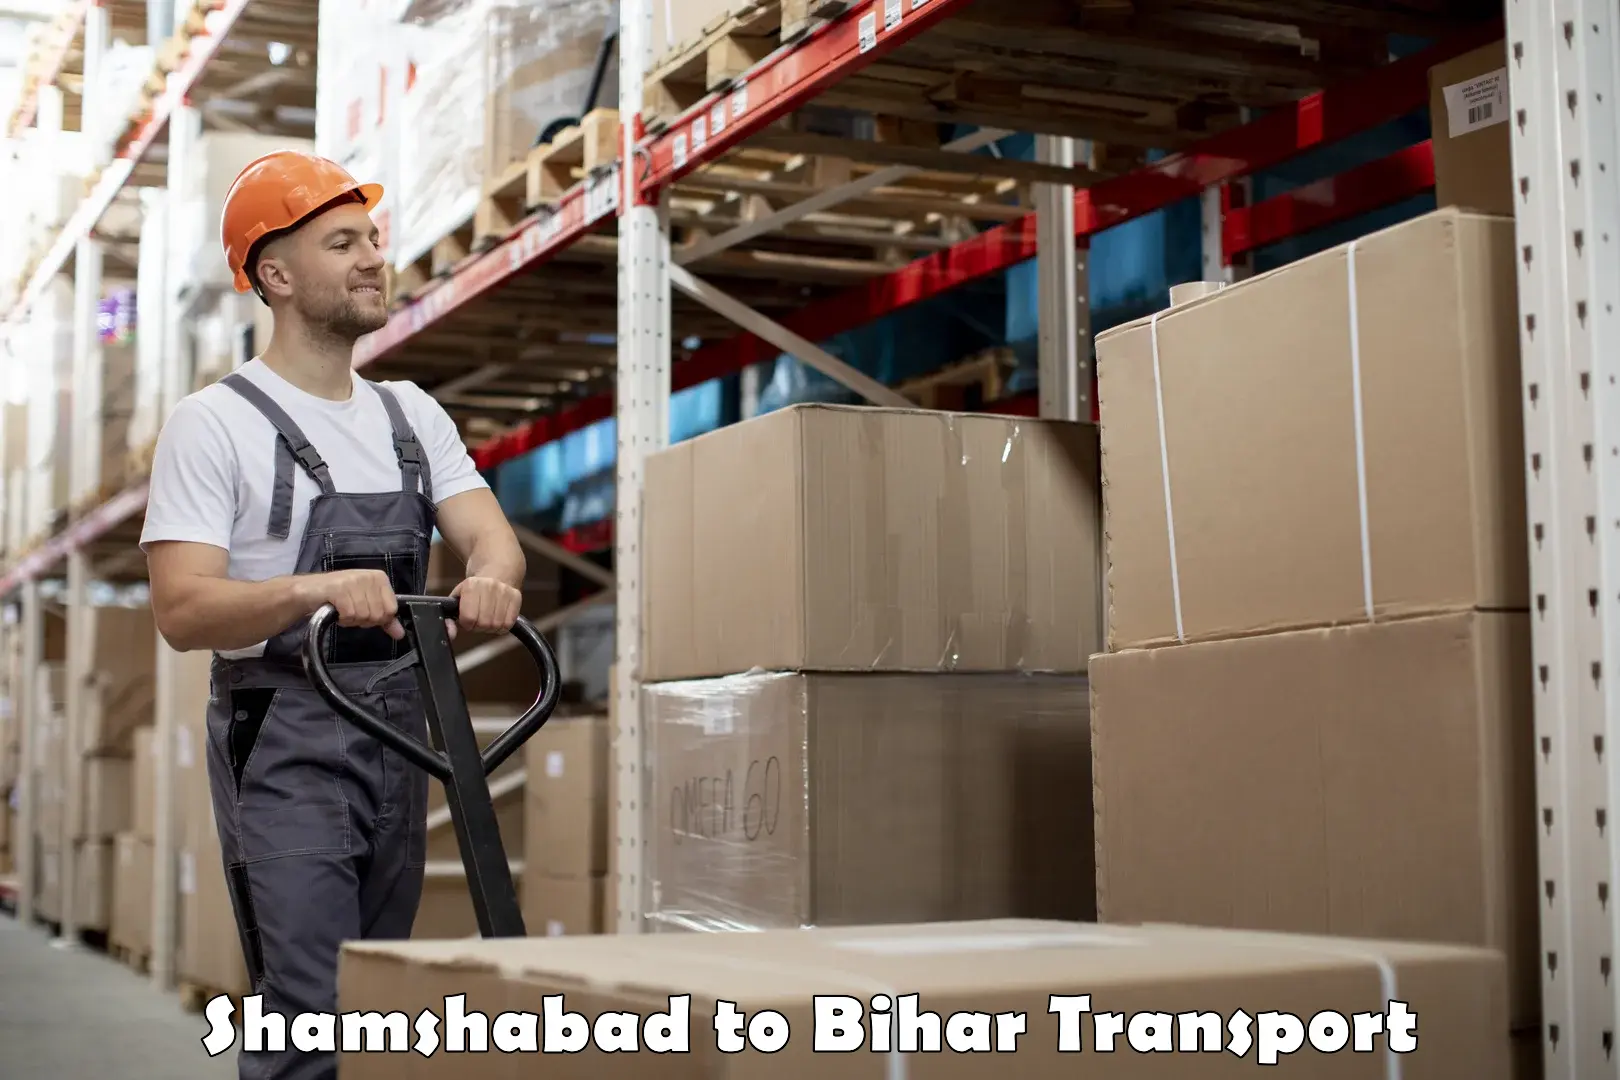 Truck transport companies in India Shamshabad to Rohtas